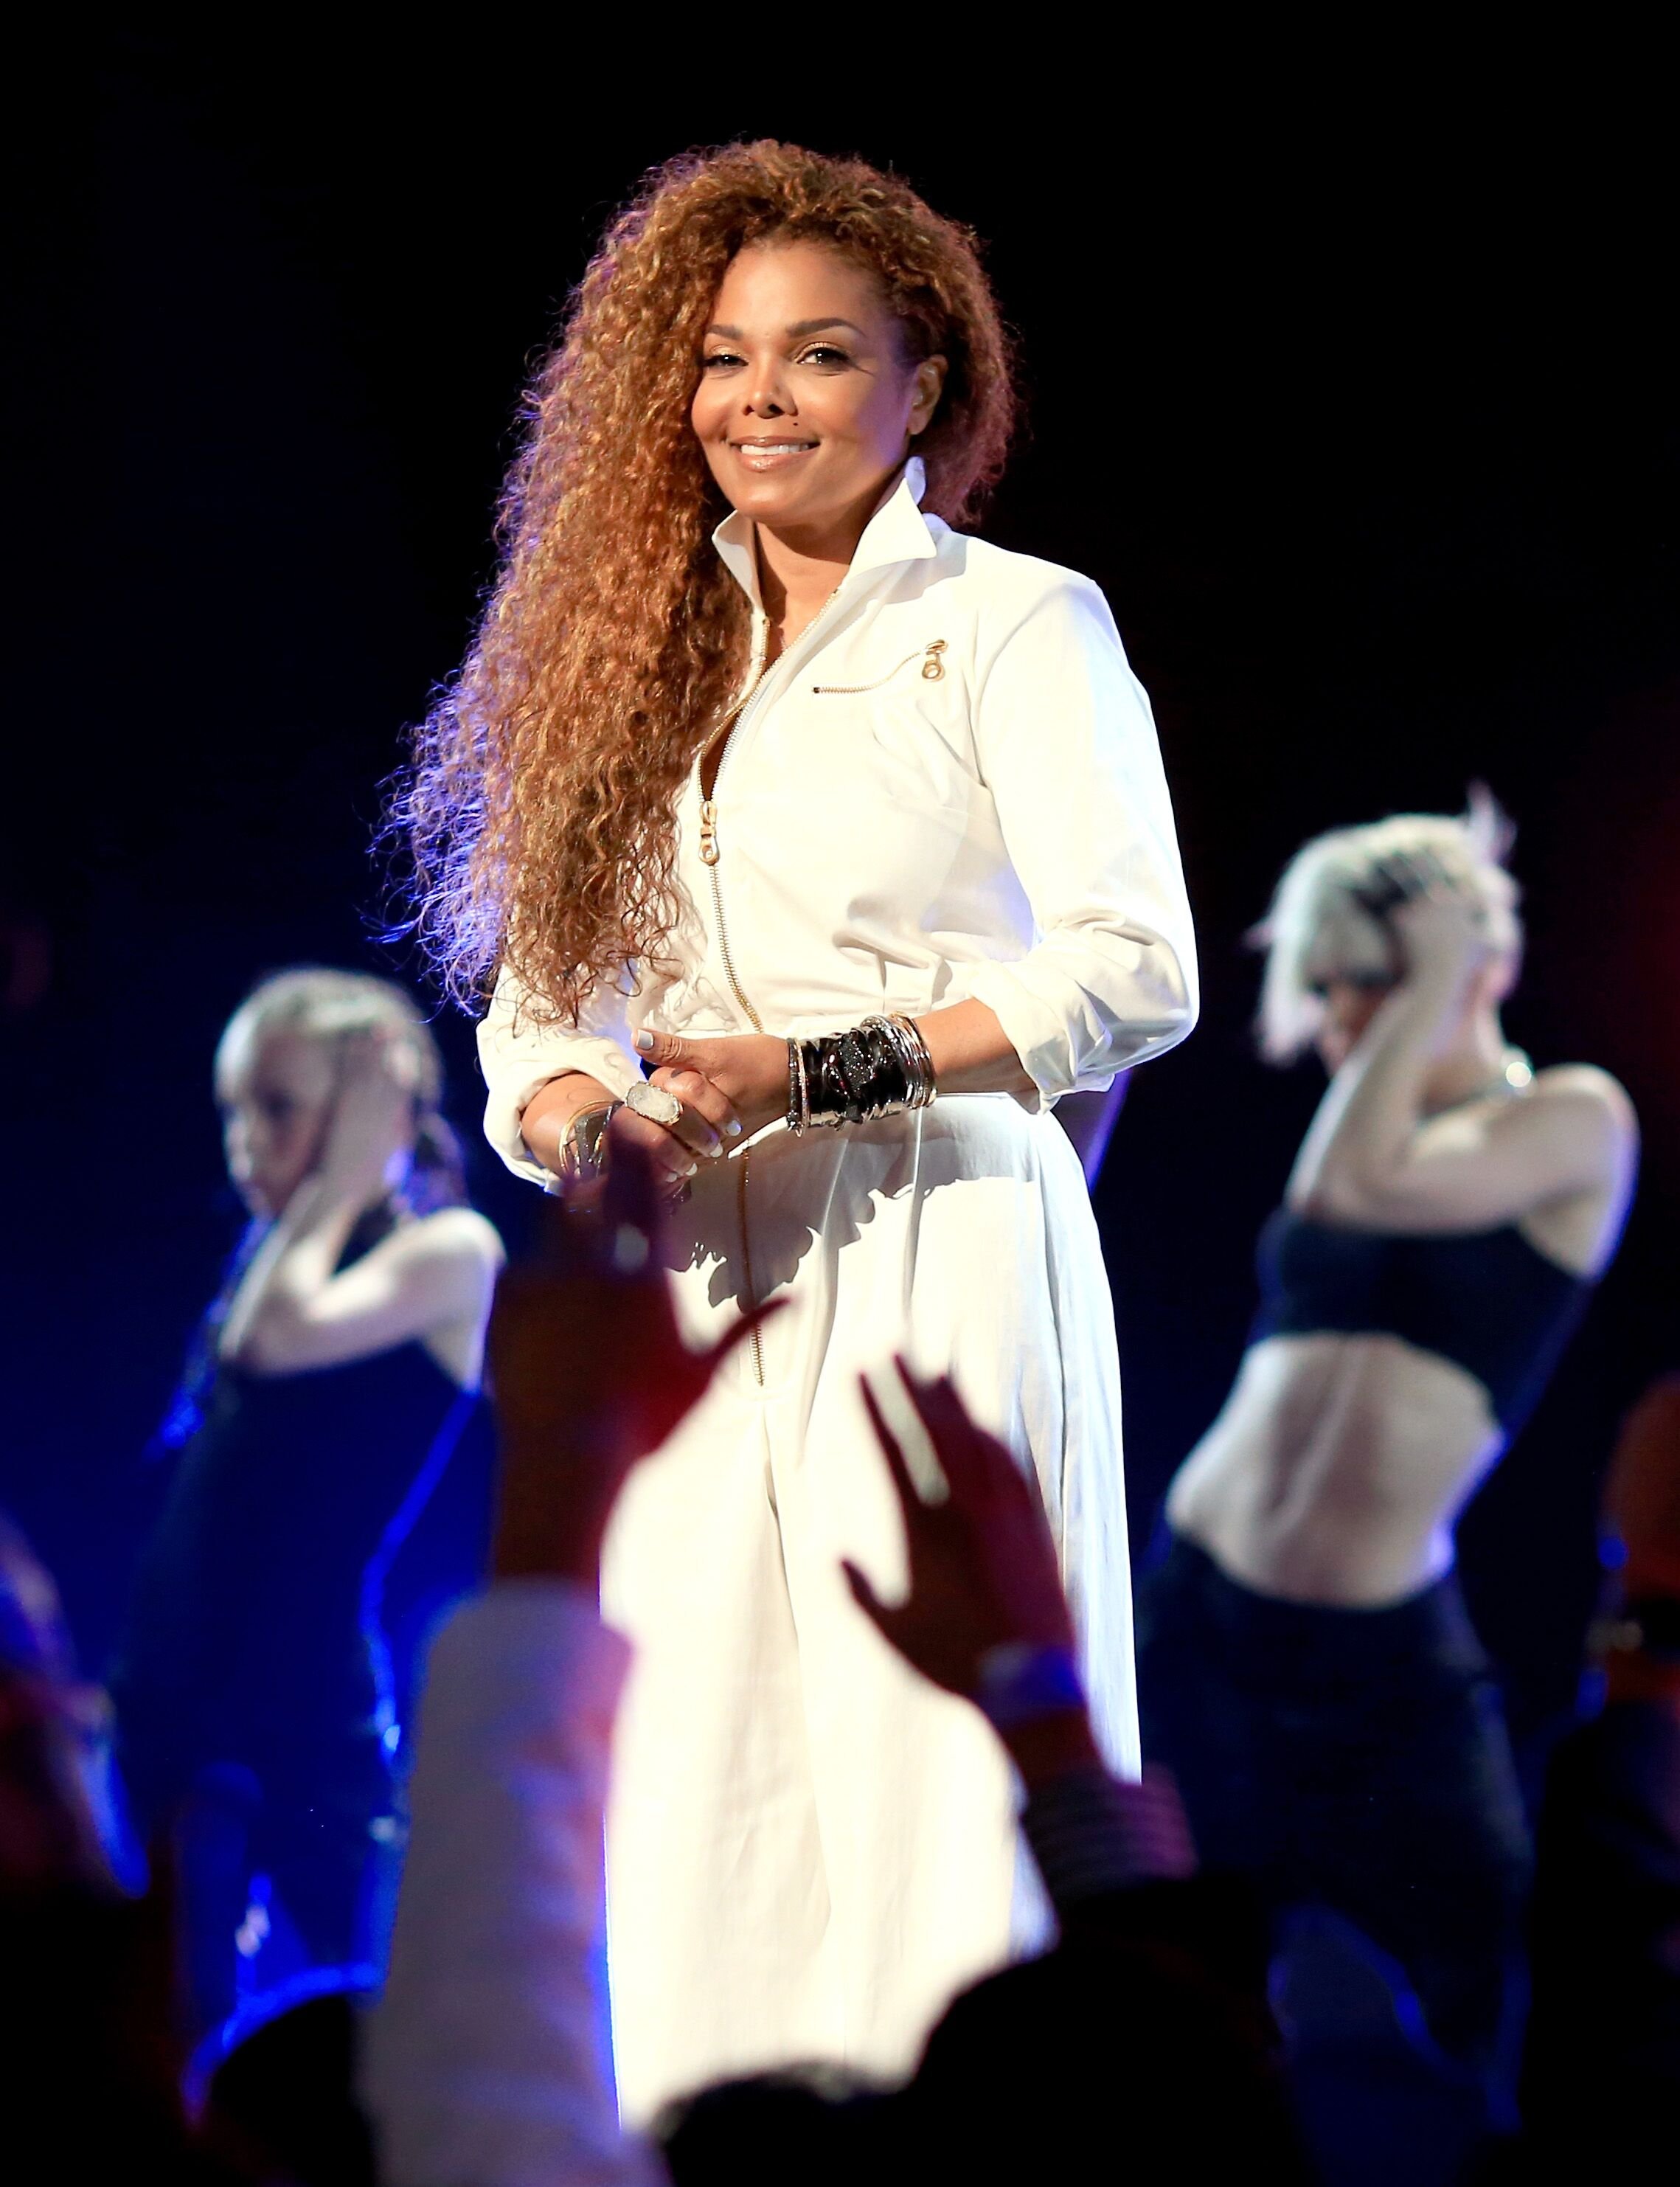 Janet Jackson speaks onstage during the 2015 BET Awards held at Microsoft Theater on June 28, 2015 in Los Angeles, California. | Photo: Getty Images